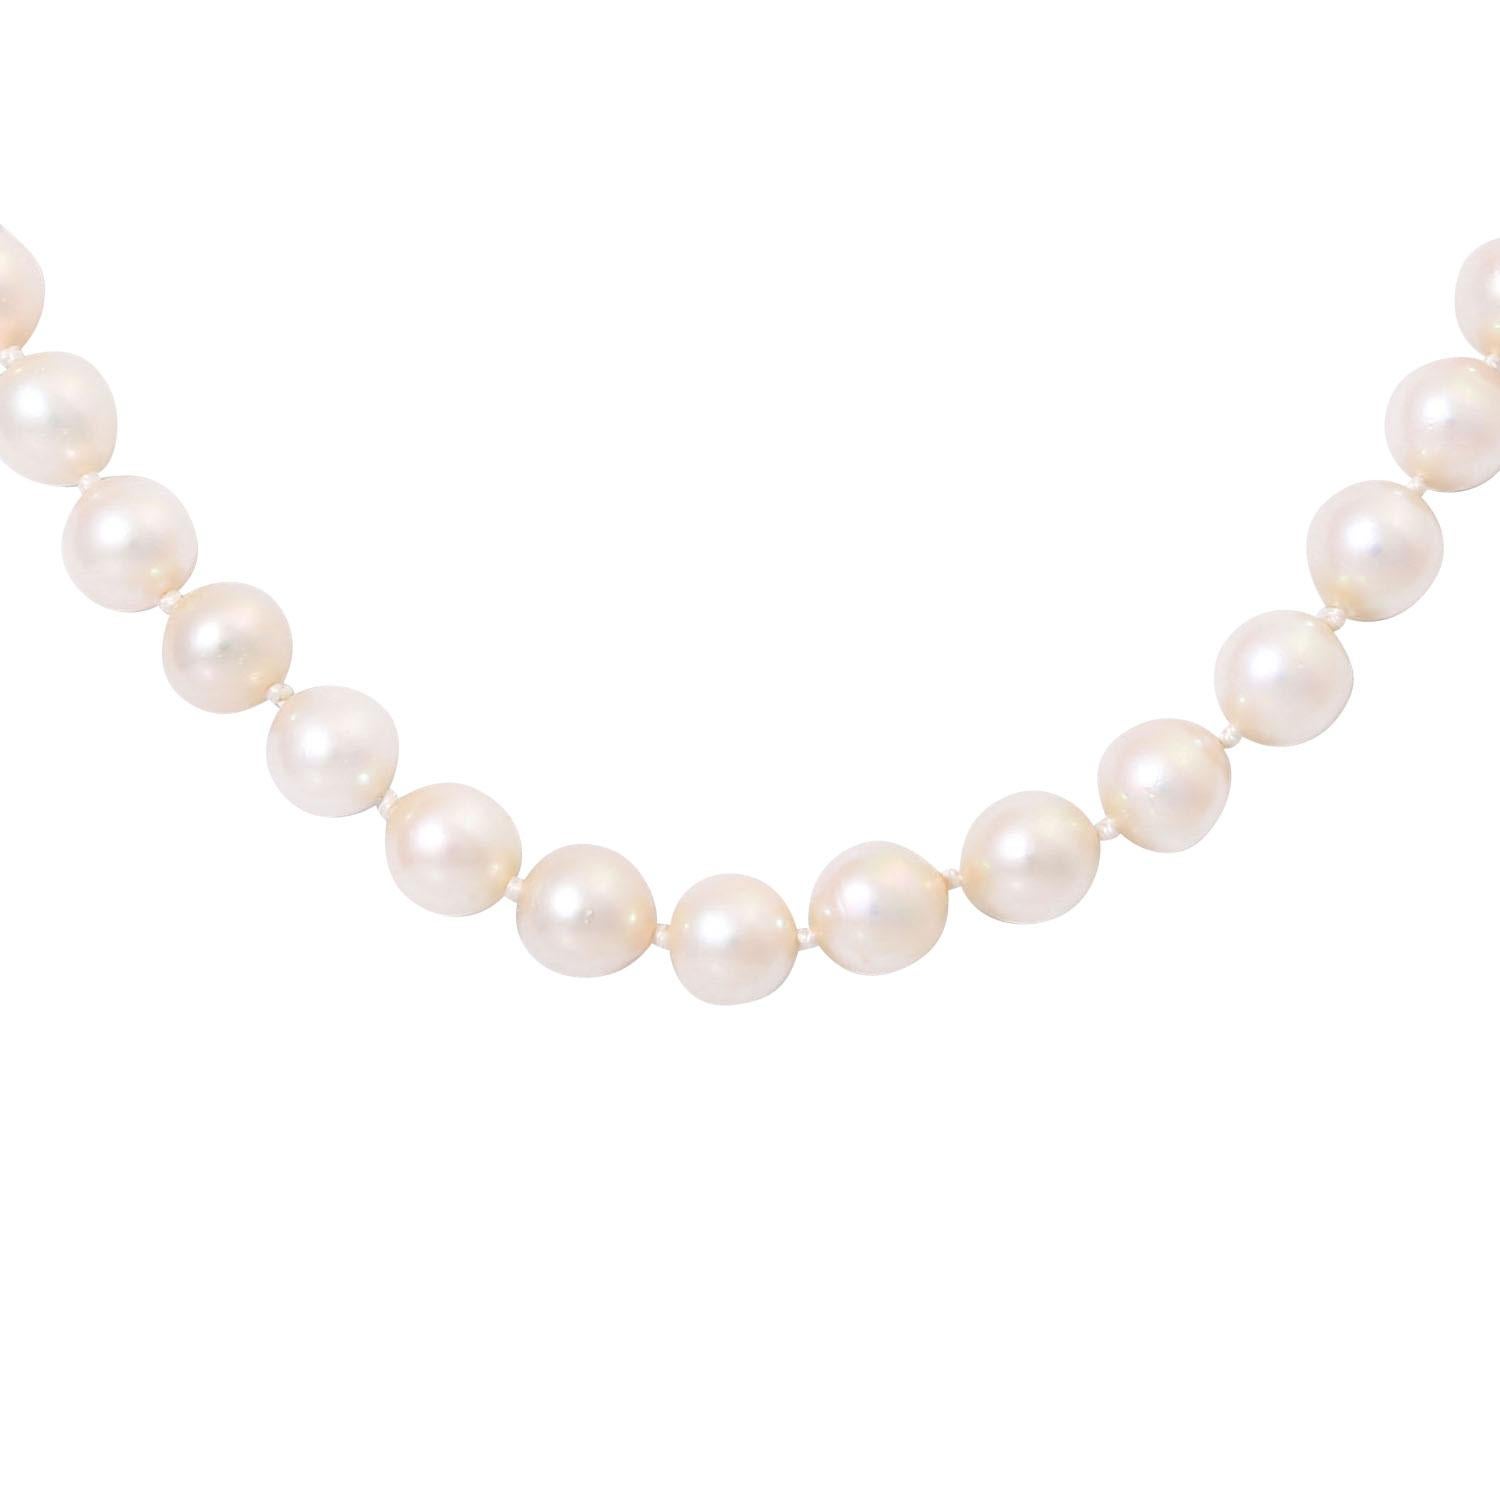 From 60 fine breeding pearls 7-7.4 mm, cream-colored with a beautiful luster, bajonet ends, L: 50 cm, knotted, without closure, 20./21. Century, good preservation.

 Necklace Made of 60 Fine Cultured Pearls 7-7.4 mm, Creme Colored, Beautiful Lustre,